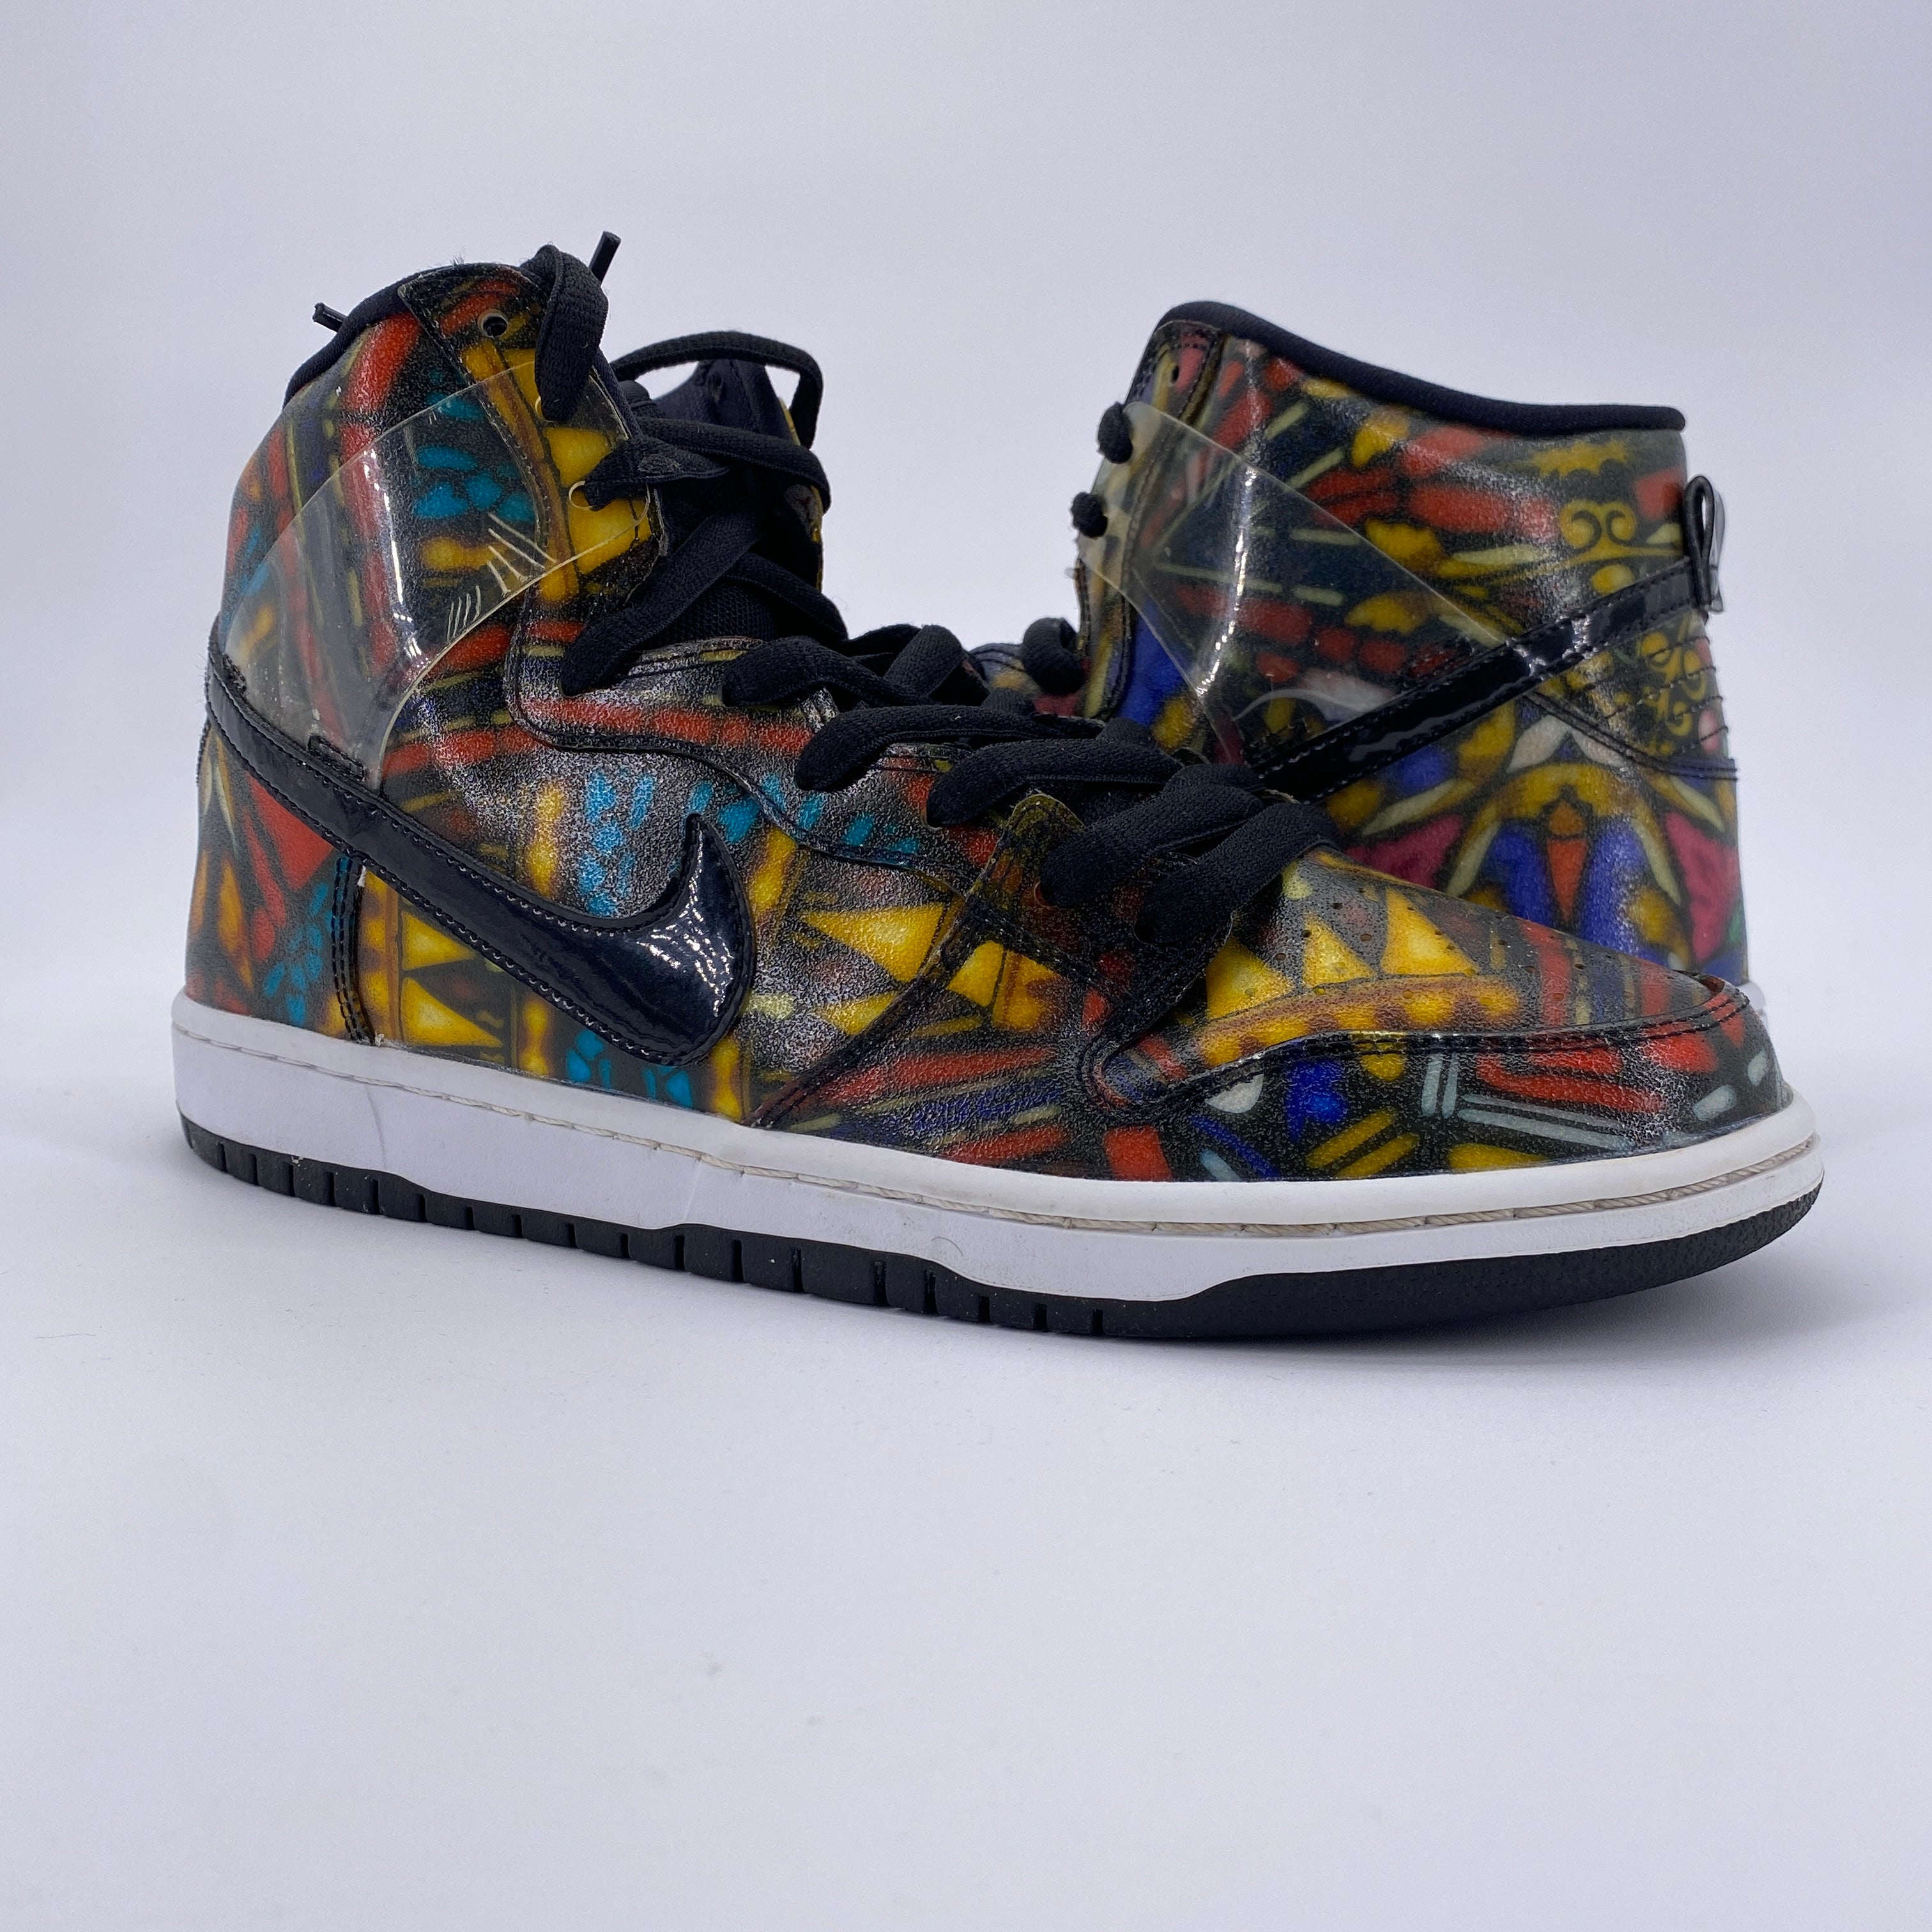 Nike SB Dunk High "Stained Glass" 2015 Used Size 10